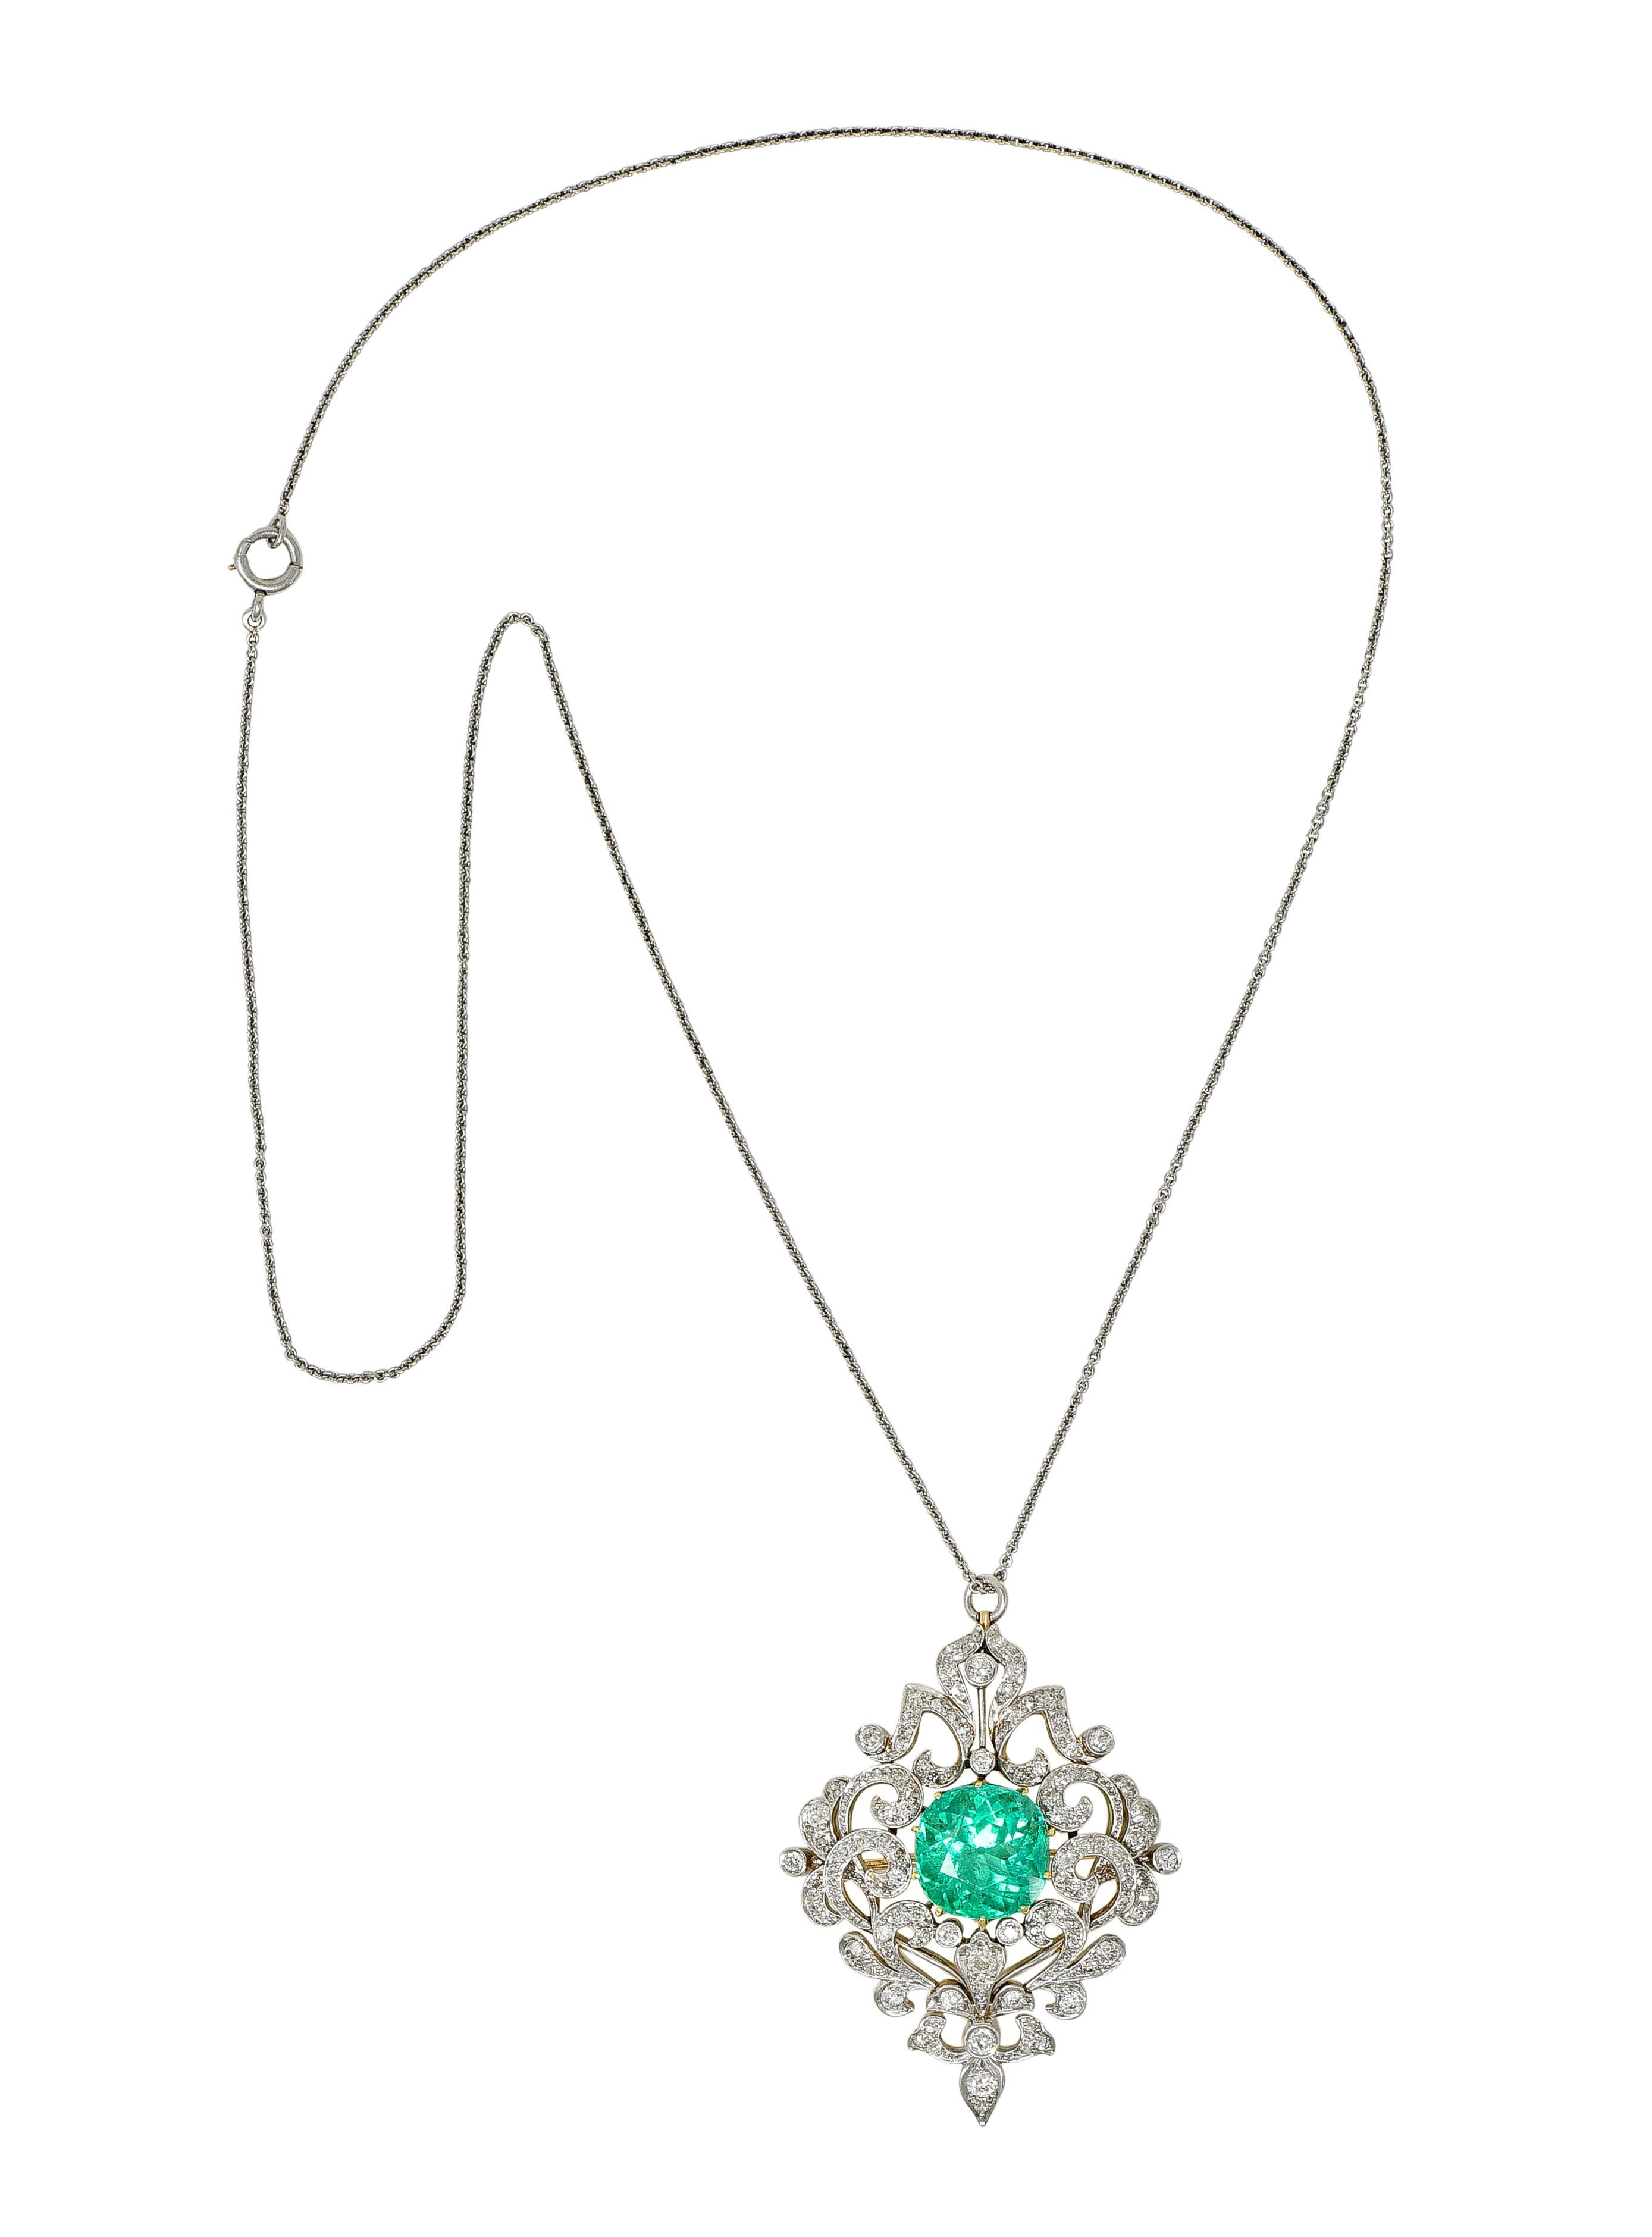 Designed as a 1.5 mm cable link chain suspending an ornately pierced scroll motif pendant 
Centering a cushion cut emerald weighing 10.35 carats - transparent bright green
Natural Colombian in origin with traditional clarity enhancement
Prong set in